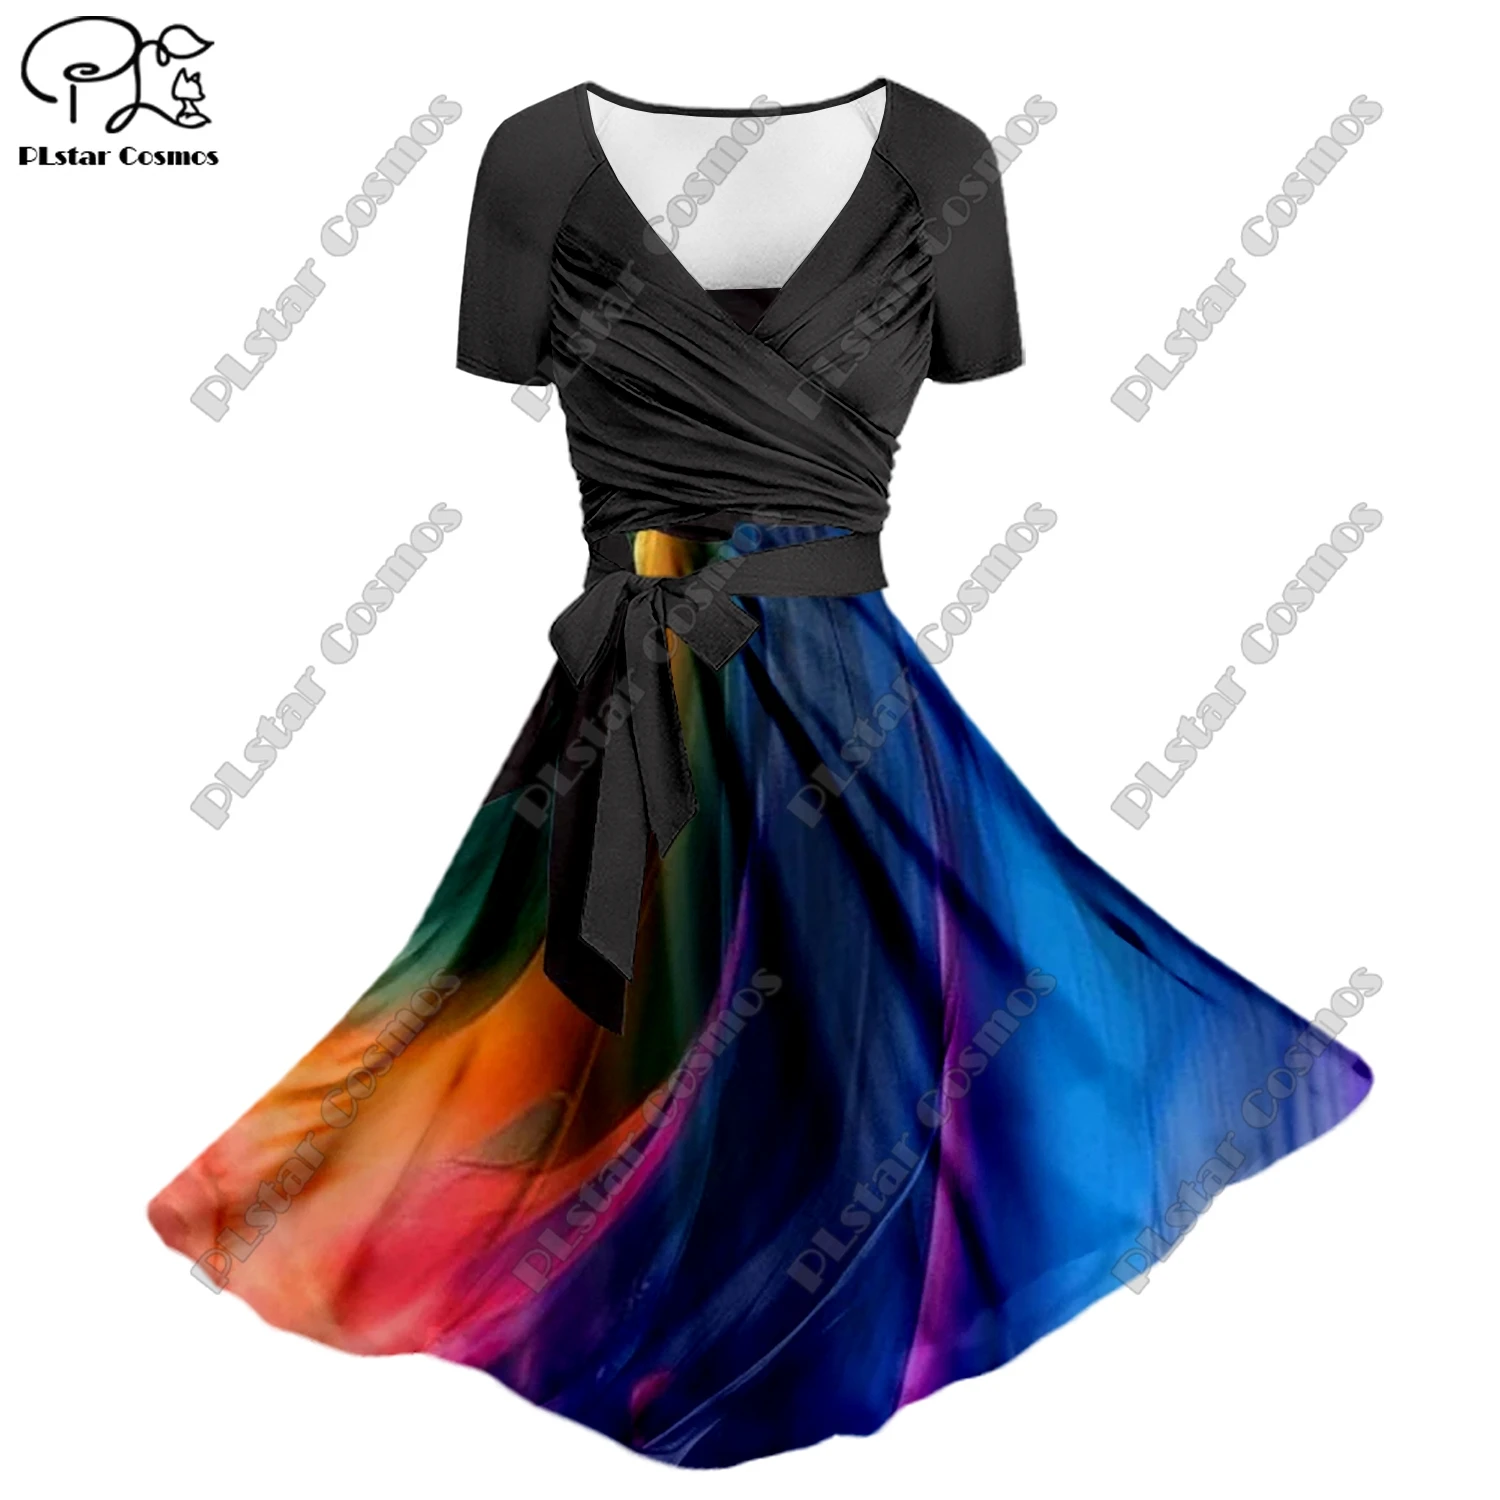 

PLstar Cosmos 3D printing ladies floral A-line suspender skirt with bowknot twill black top two-piece summer